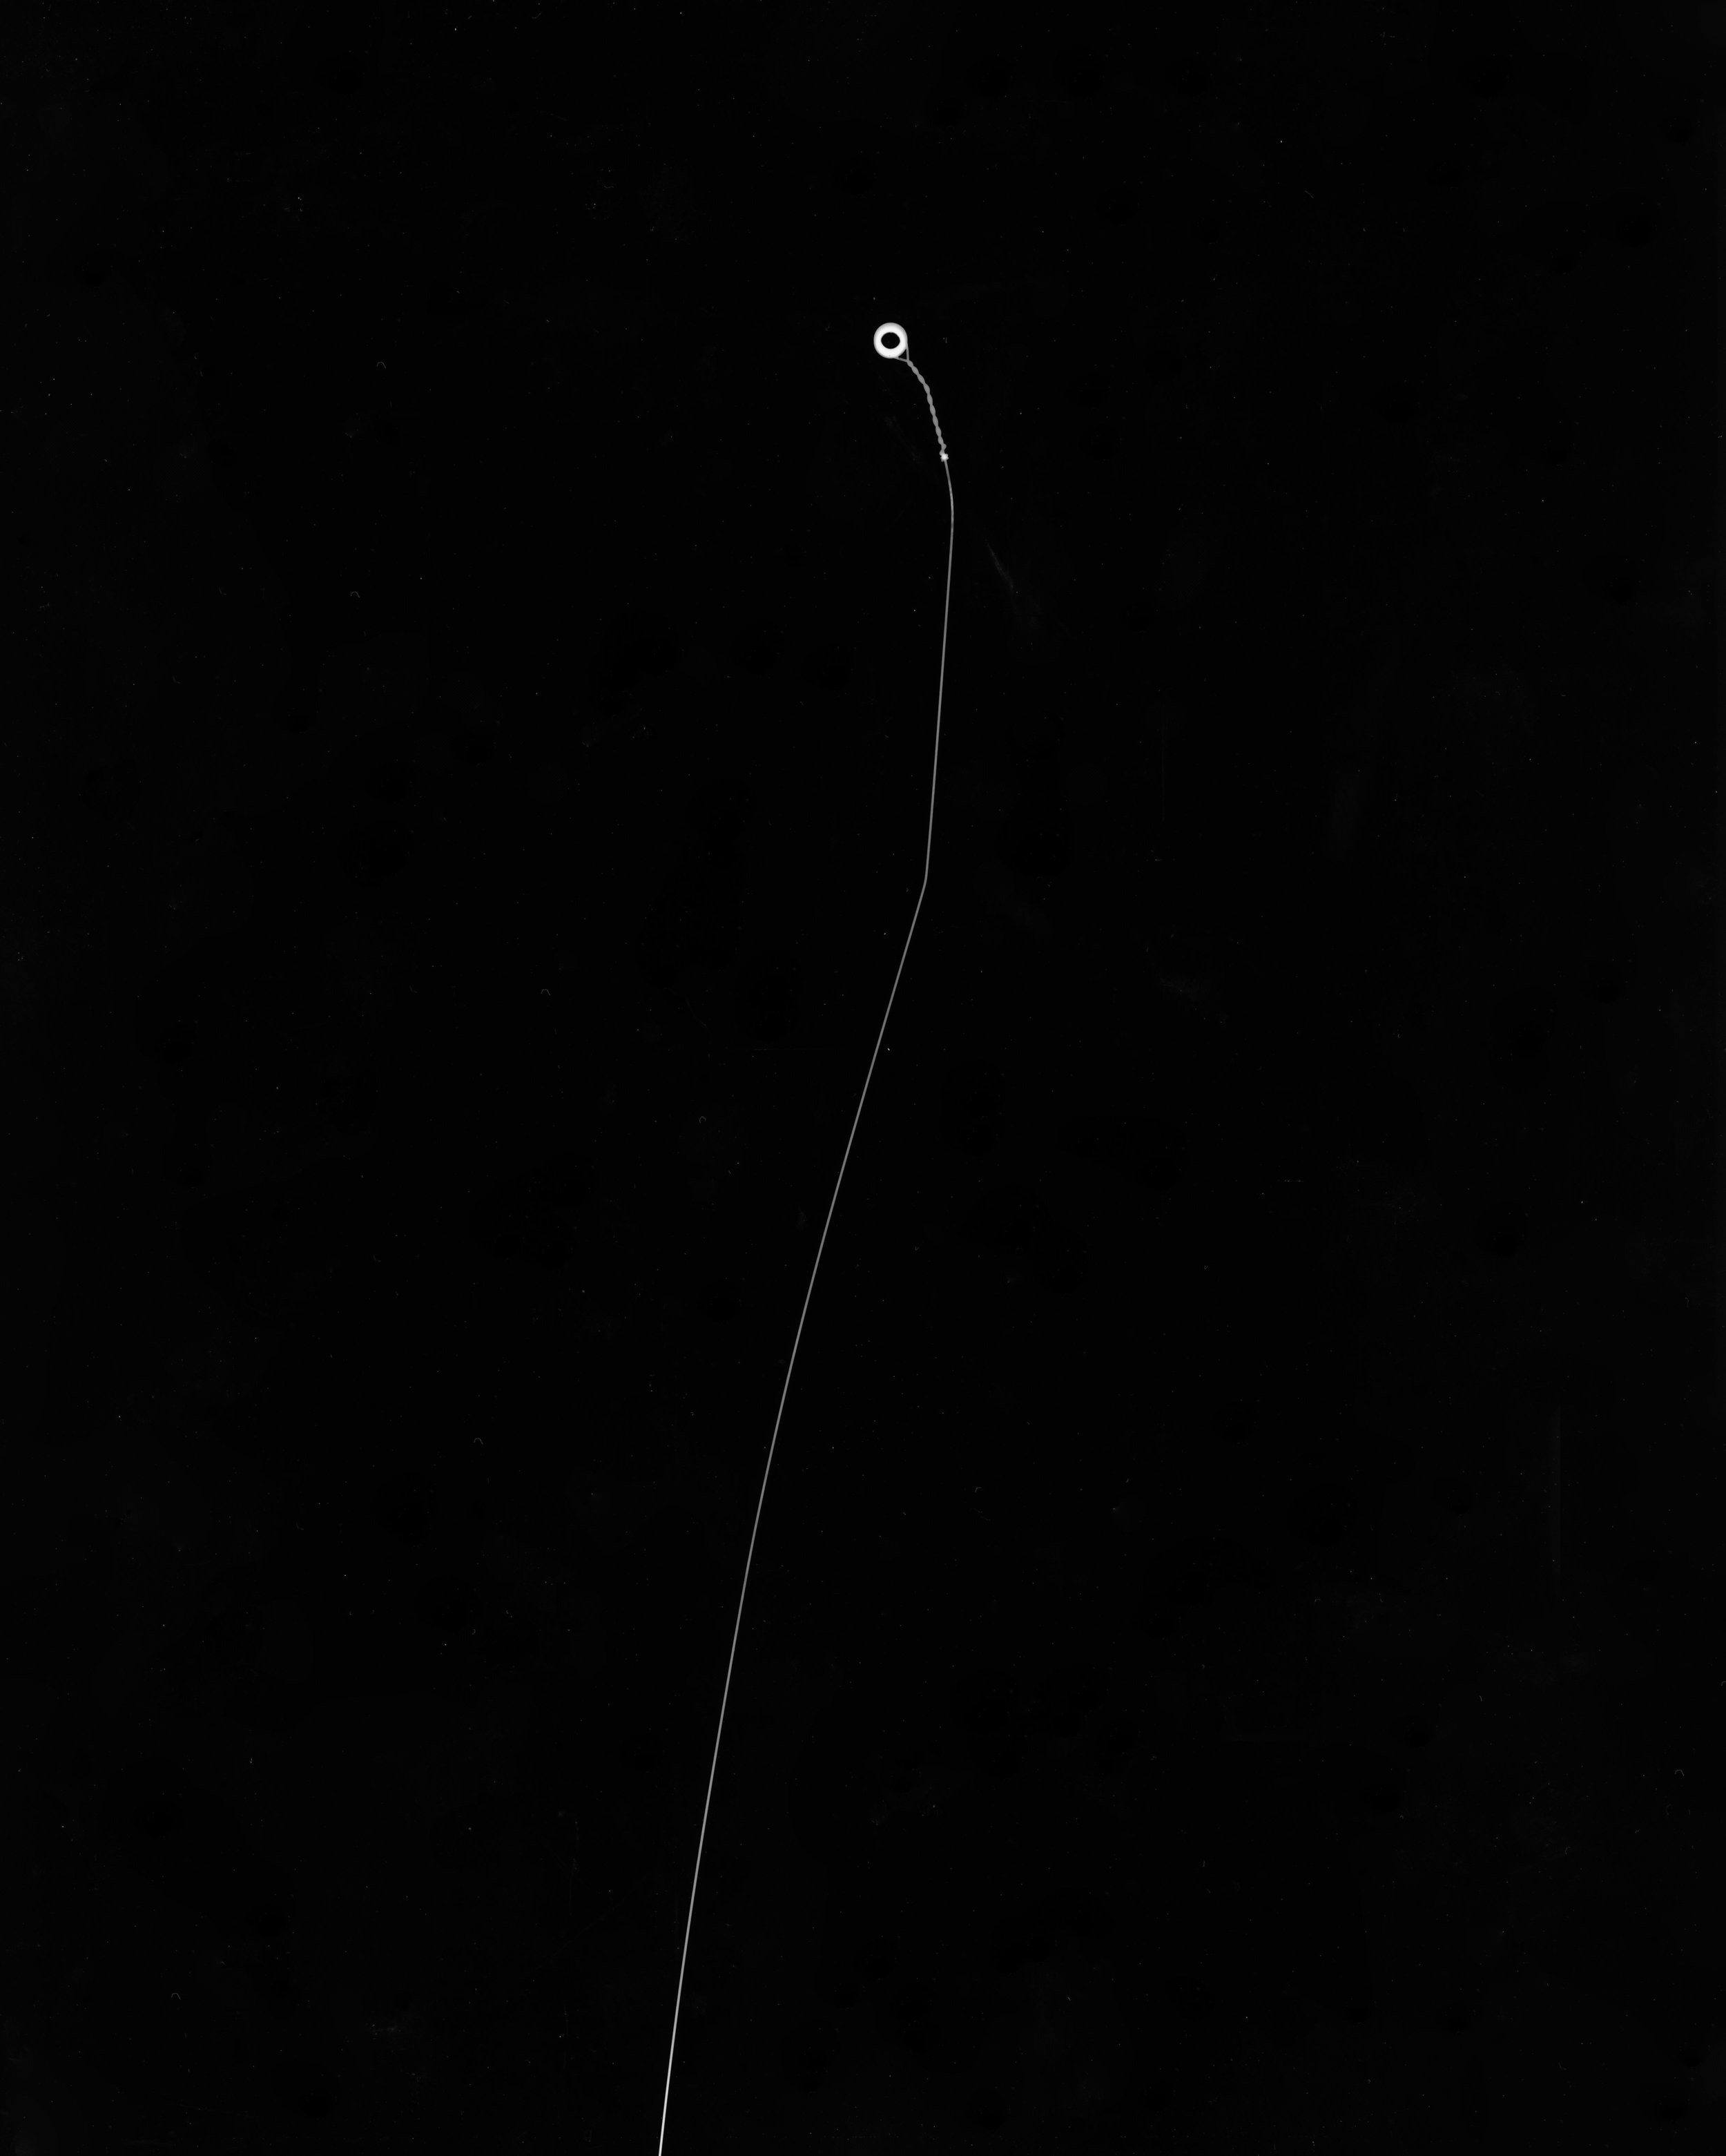 A (worn-out strings), 2017, Shadowgram on fibre paper, 8’x10’ 2017  